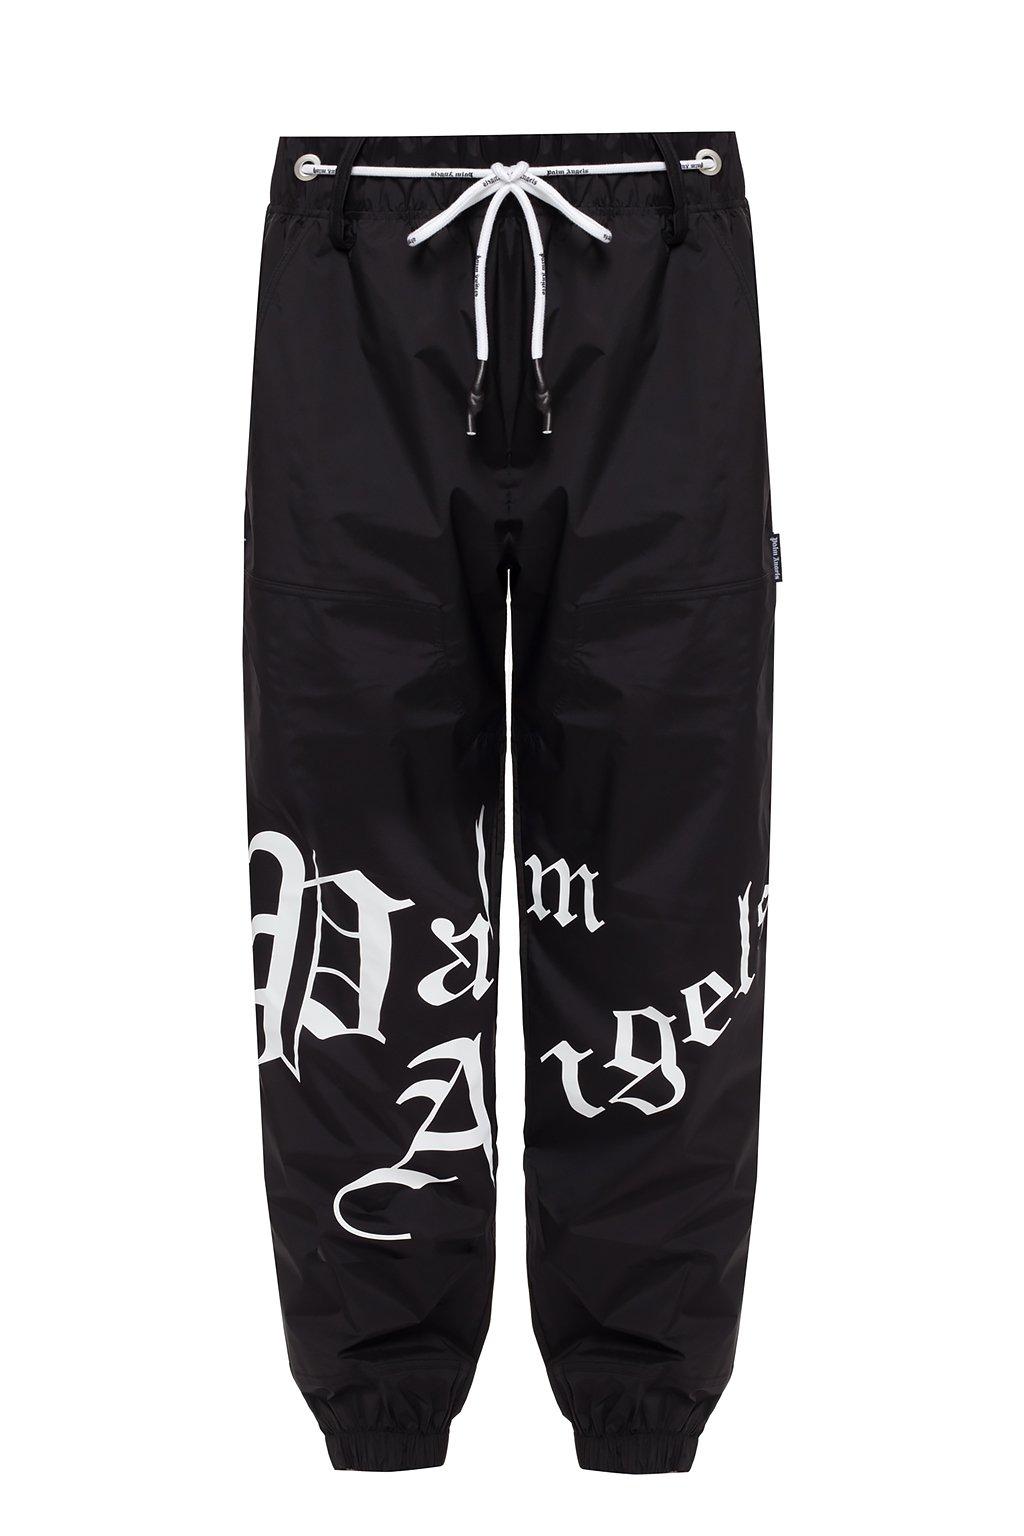 Palm Angels Rubber Sweatpants With Logo Black for Men - Lyst